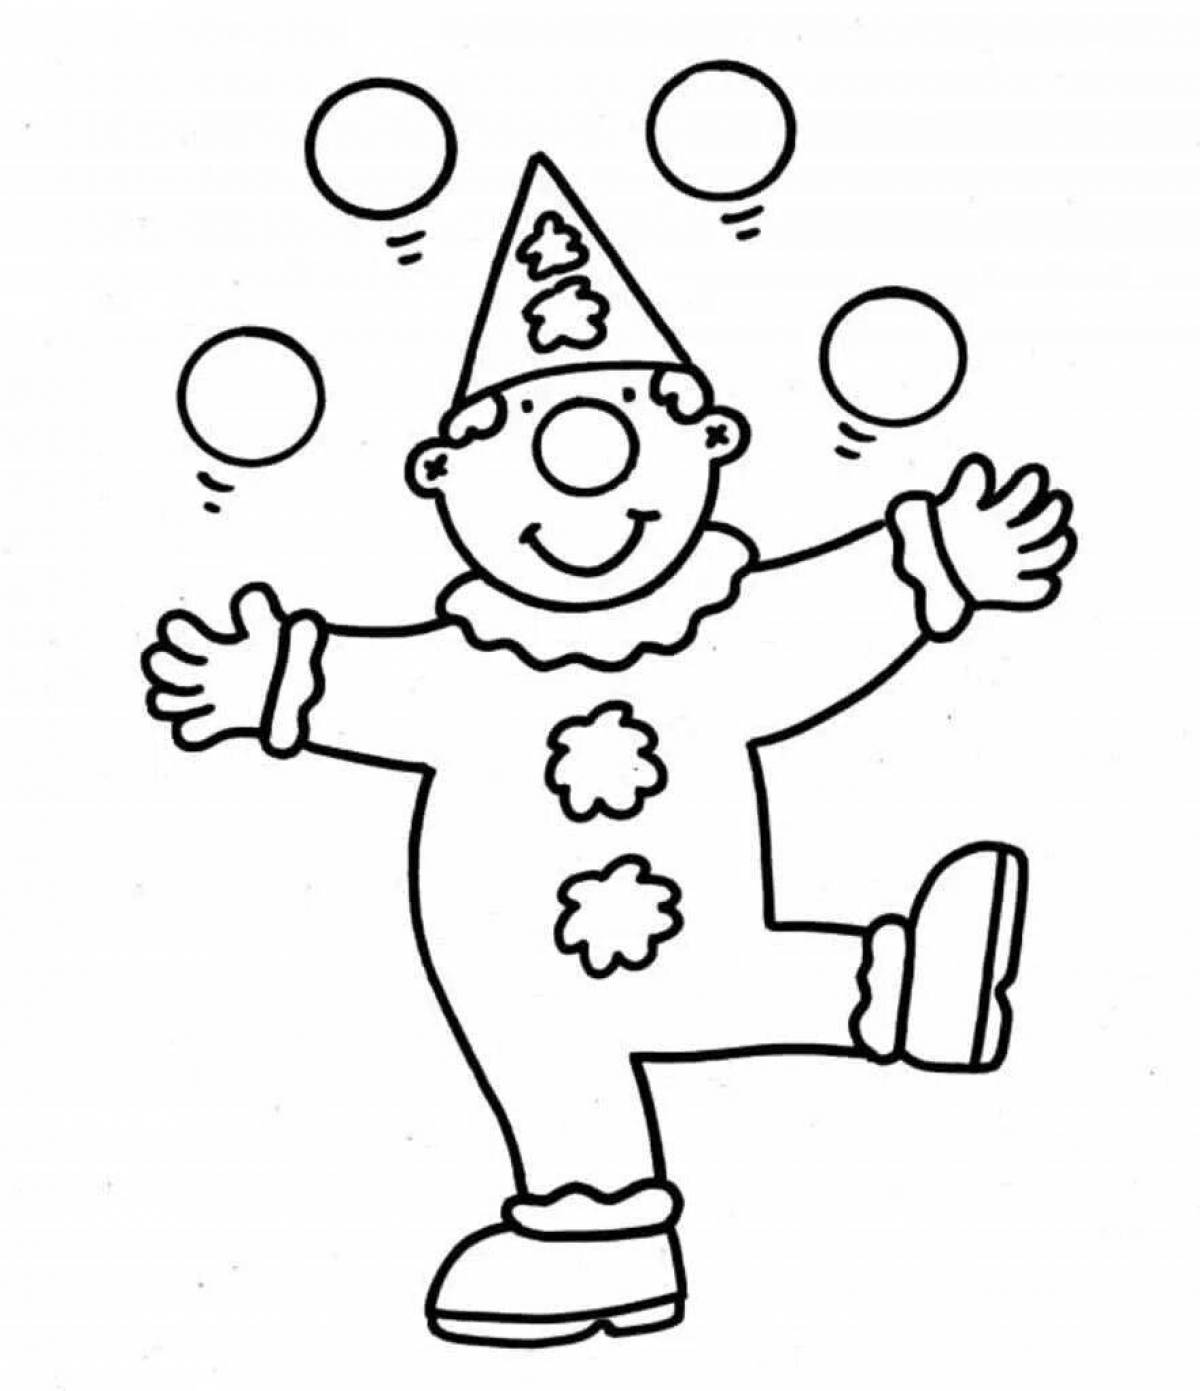 Glowing clown coloring book for kids